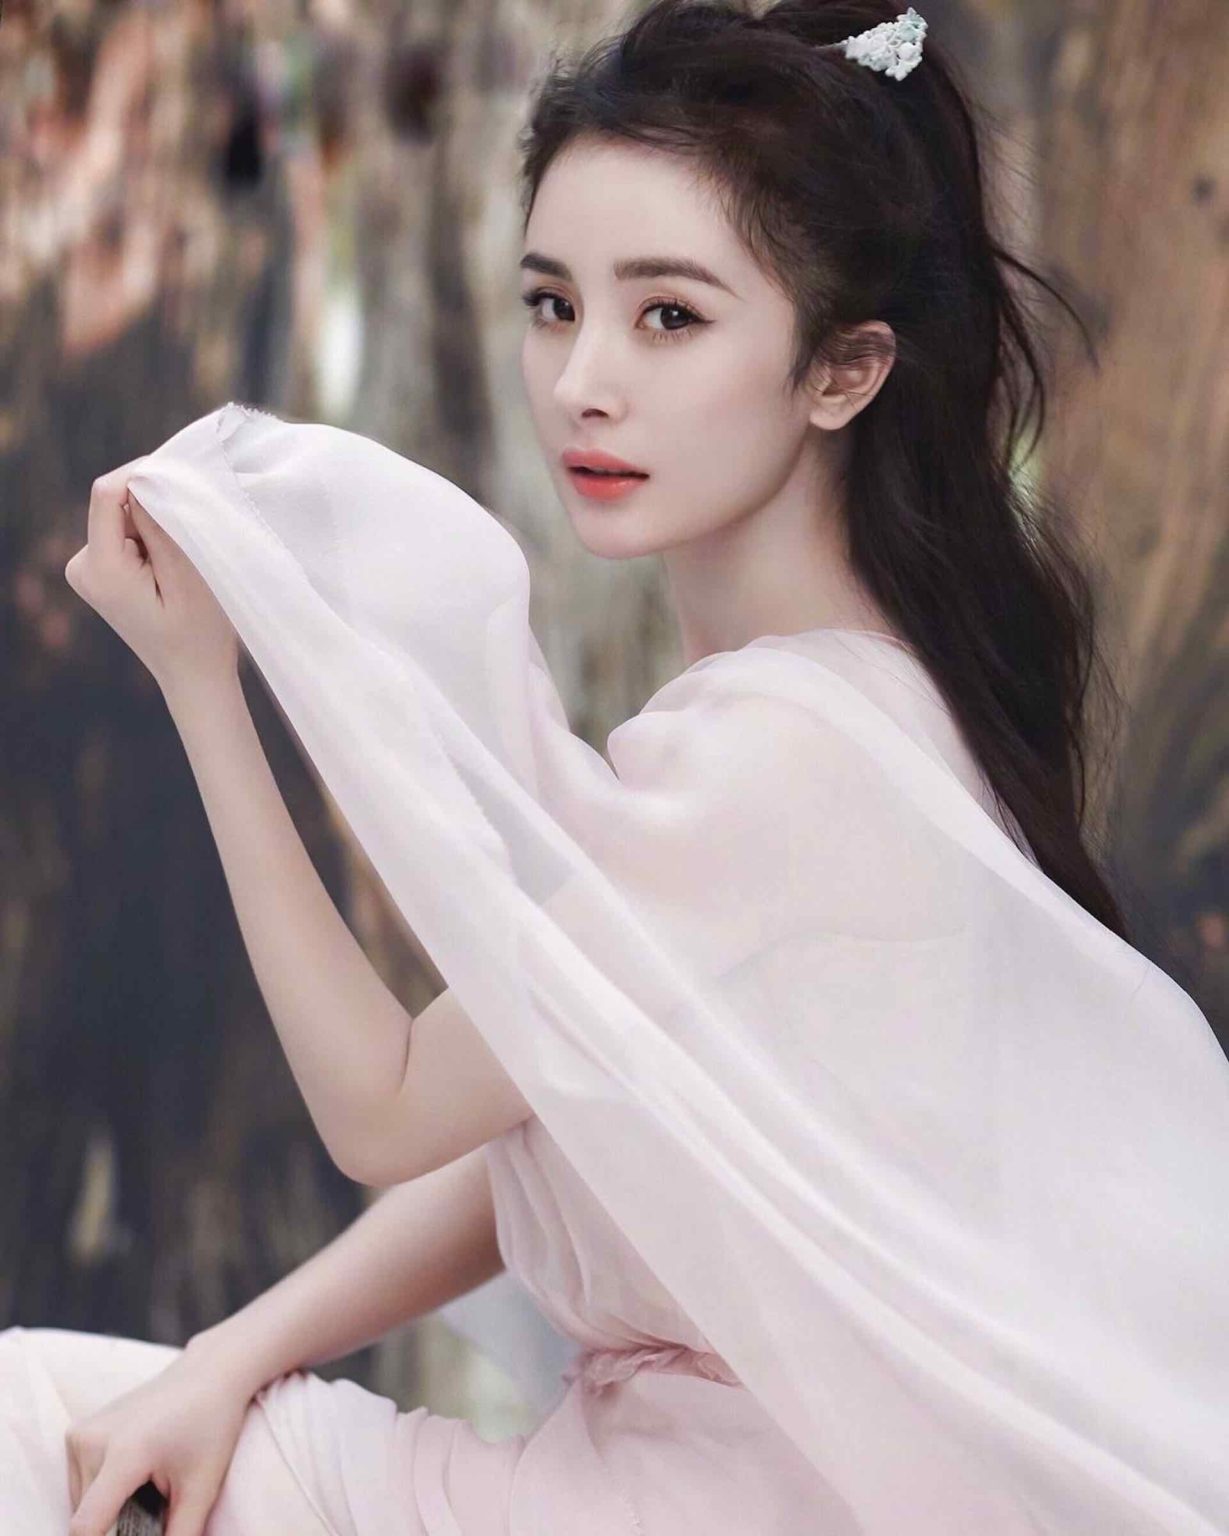 Yang Mi has been making waves in a variety of projects, but specifically in C-dramas. Here's why you need to fall in love with Yang Mi.